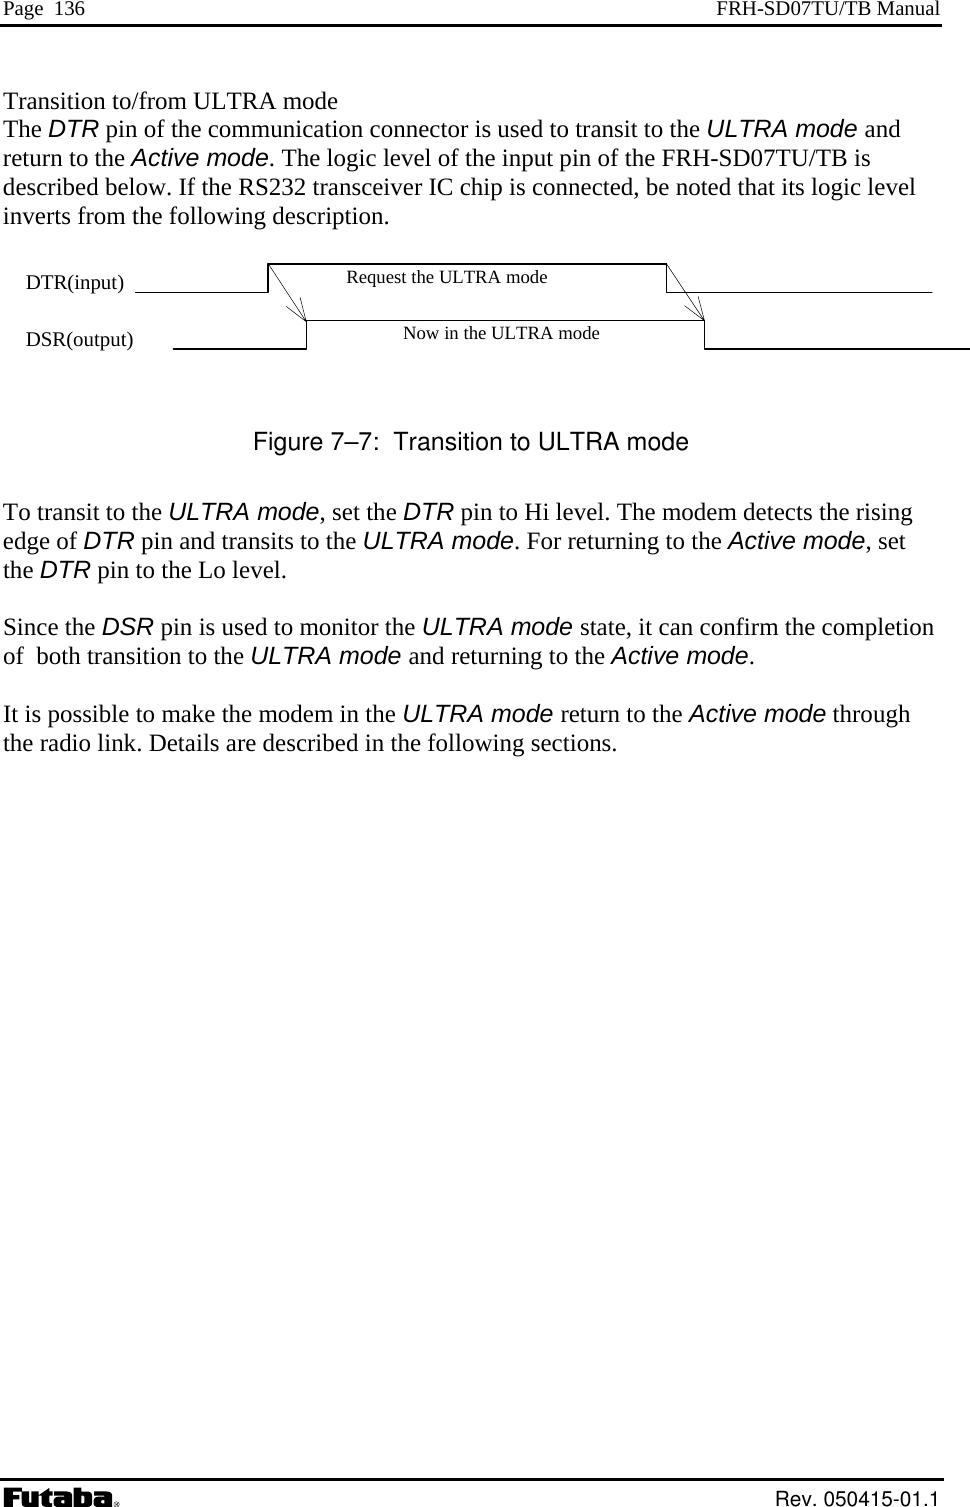 Page  136  FRH-SD07TU/TB Manual Transition to/from ULTRA mode The DTR pin of the communication connector is used to transit to the ULTRA mode and return to the Active mode. The logic level of the input pin of the FRH-SD07TU/TB is escribed below. If the RS232 transceiver IC chip is connected, be noted that its logic level Figure 7–7:  Transition to ULTRA mode o transit to the ULTRA mode, set the DTR pin to Hi level. The modem detects the rising dge of DTR pin and transits to the ULTRA mode. For returning to the Active mode, set e DTR pin to the Lo level. Since the DSR p  the completion of  both transition e following sections. dinverts from the following description.   Request the ULTRA mode Now in the ULTRA modeDTR(input) DSR(output)     Teth in is used to monitor the ULTRA mode state, it can confirm to the ULTRA mode and returning to the Active mode. It is possible to make the modem in the ULTRA mode return to the Active mode through the radio link. Details are described in th Rev. 050415-01.1 